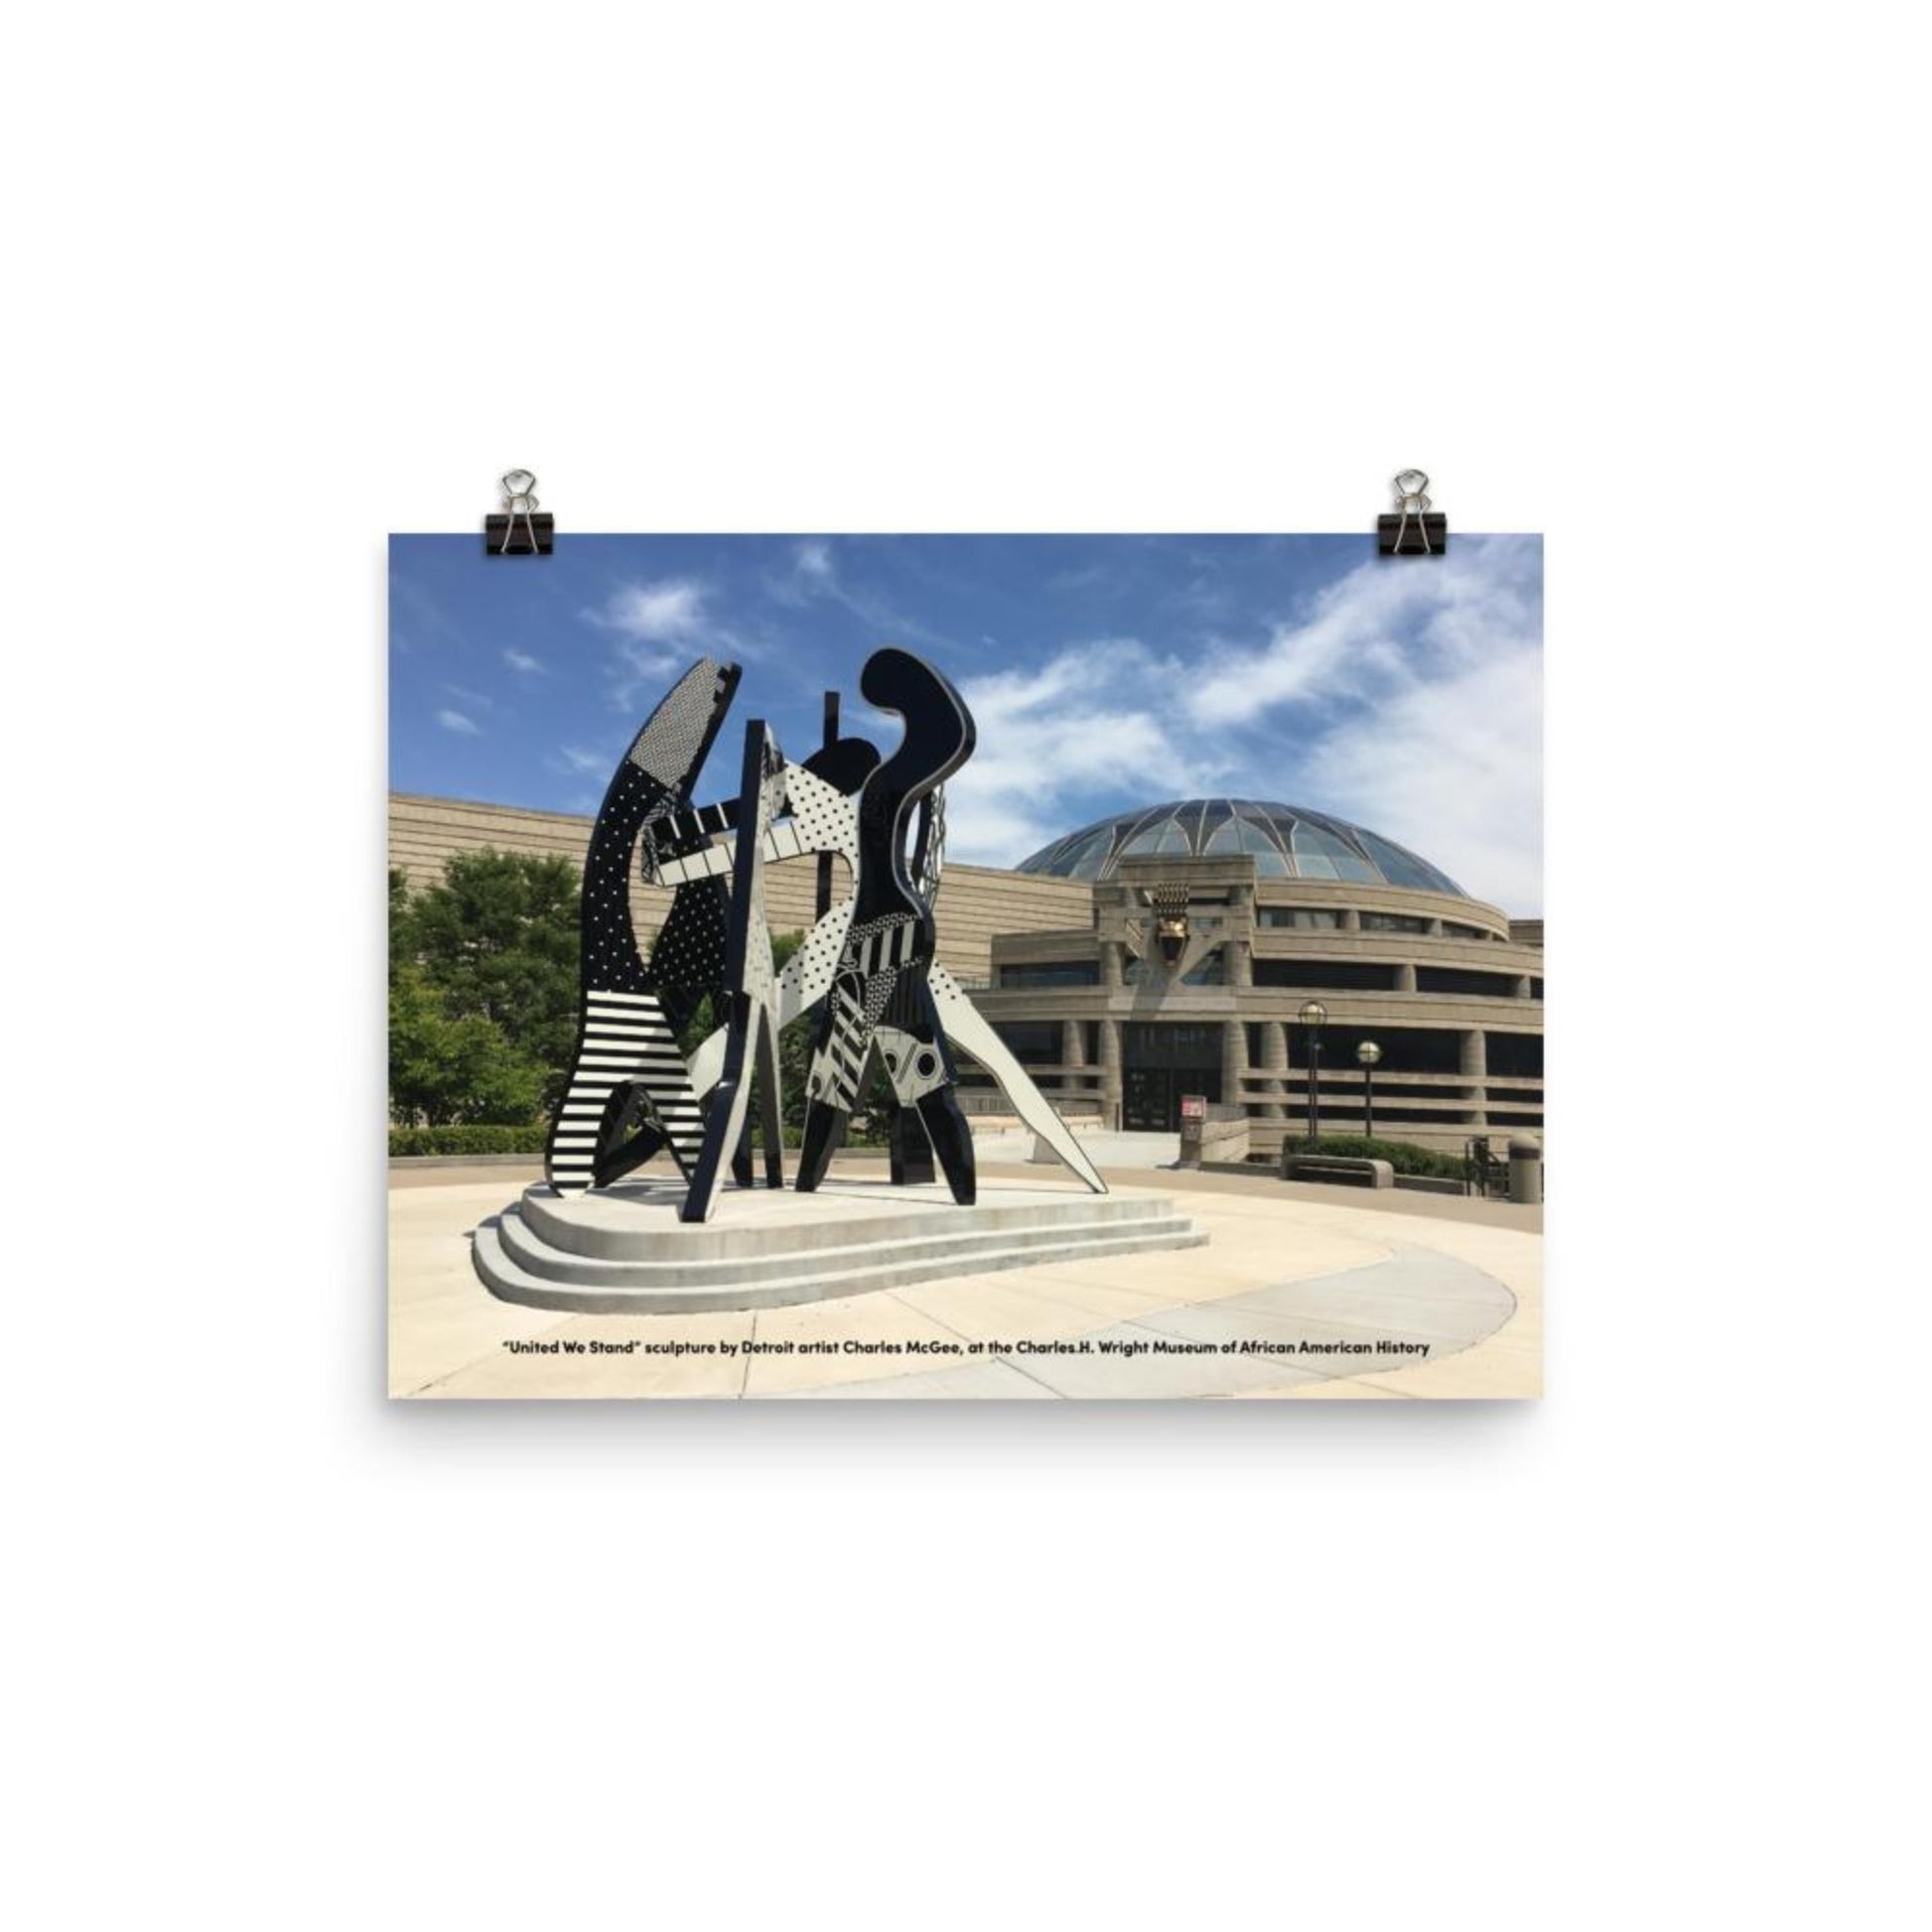 12 inch by 16 inch poster with United We Stand sculpture in front of Charles H. Wright Museum of African American History